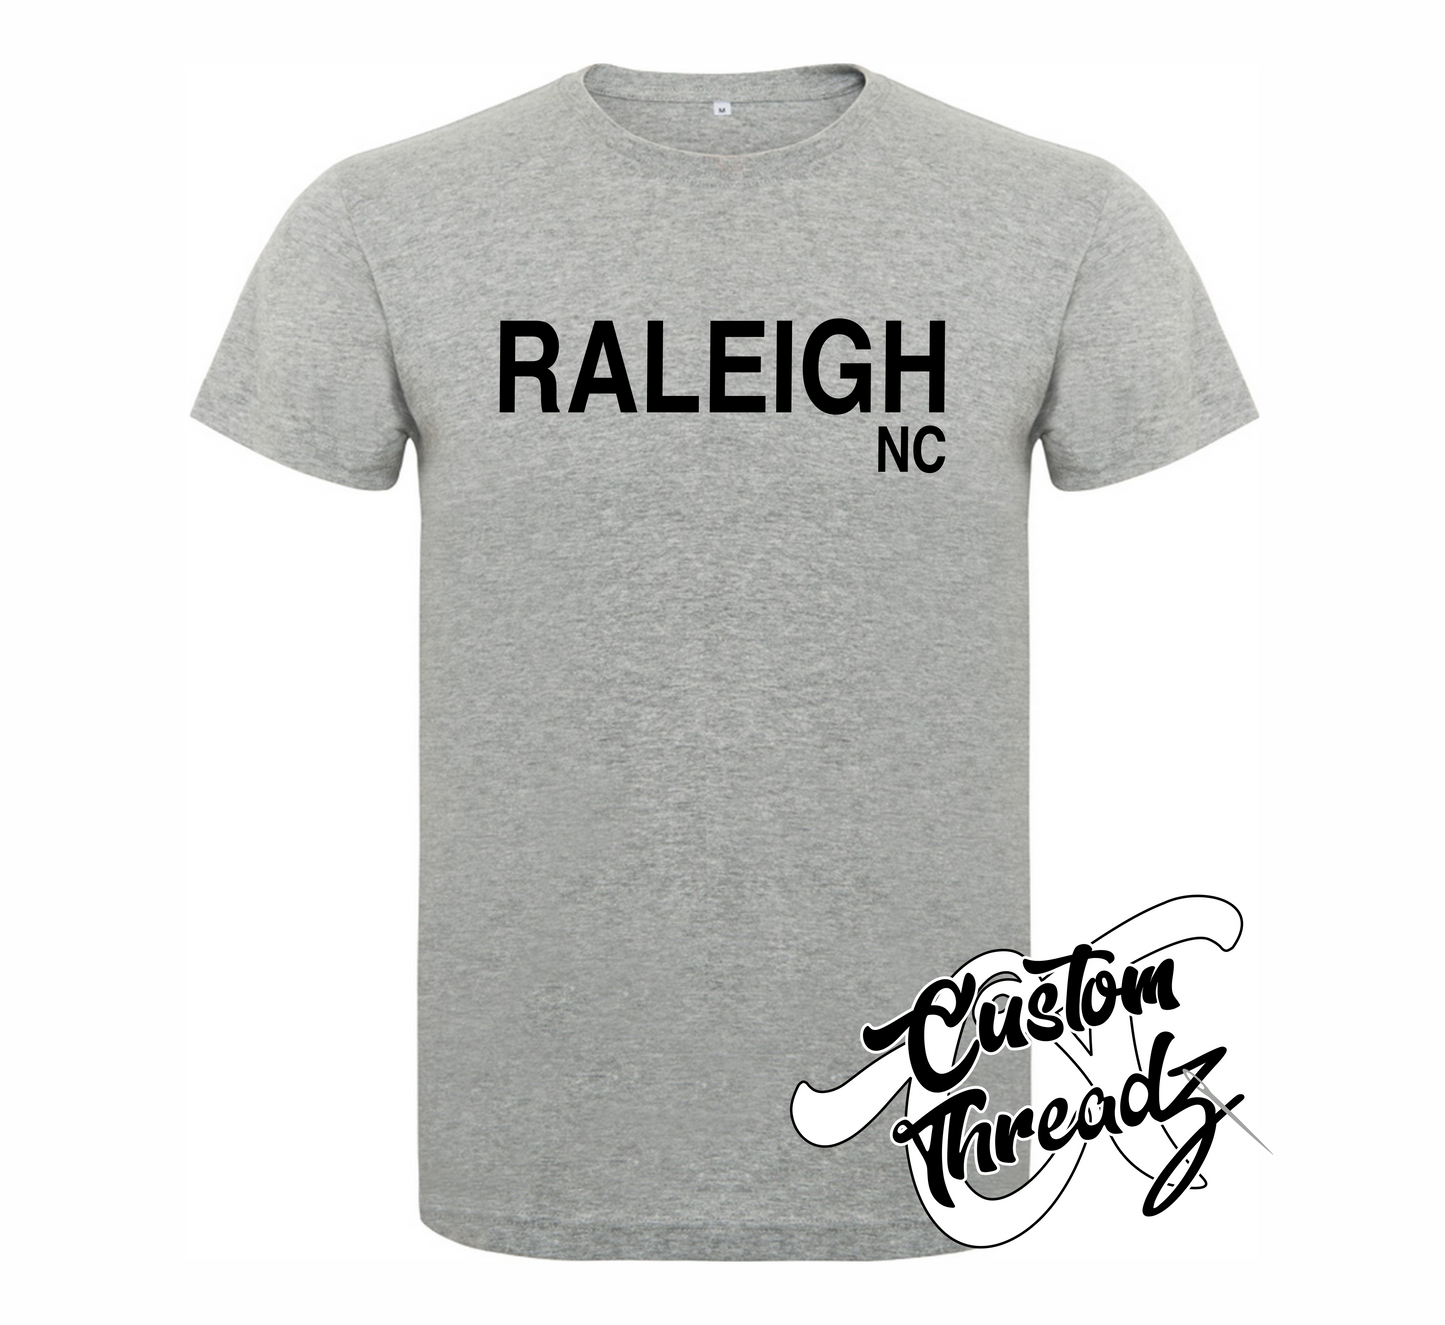 athletic heather grey tee with raleigh nc DTG printed design